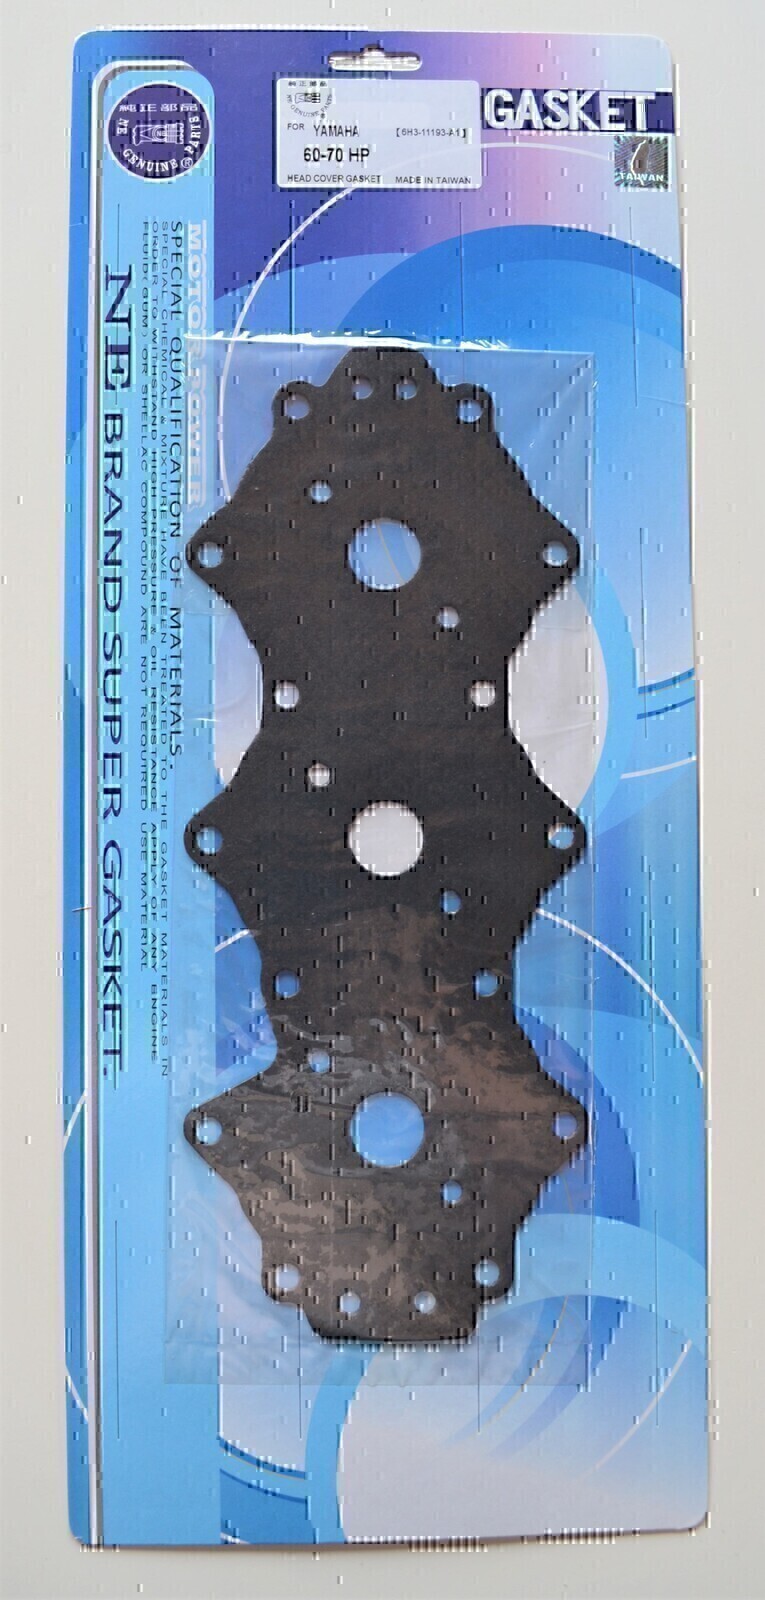 HEAD COVER GASKET FOR YAMAHA 60HP 70HP 1984 - 2014 OUTBOARD MOTOR # 6H3-11193-A1